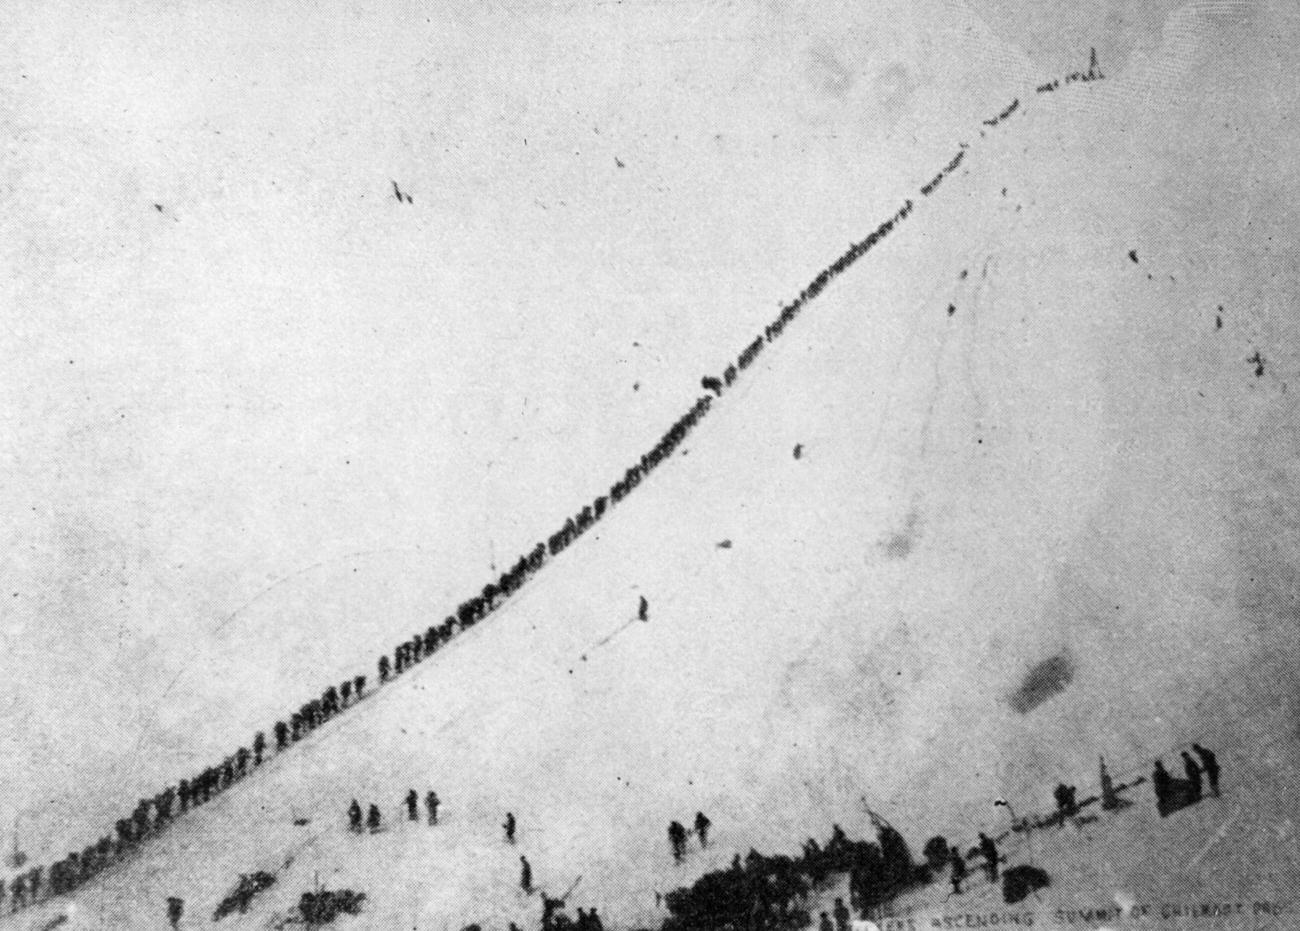 Prospectors ascending Chilcoot Pass by rope after gold discovery in the Klondike.